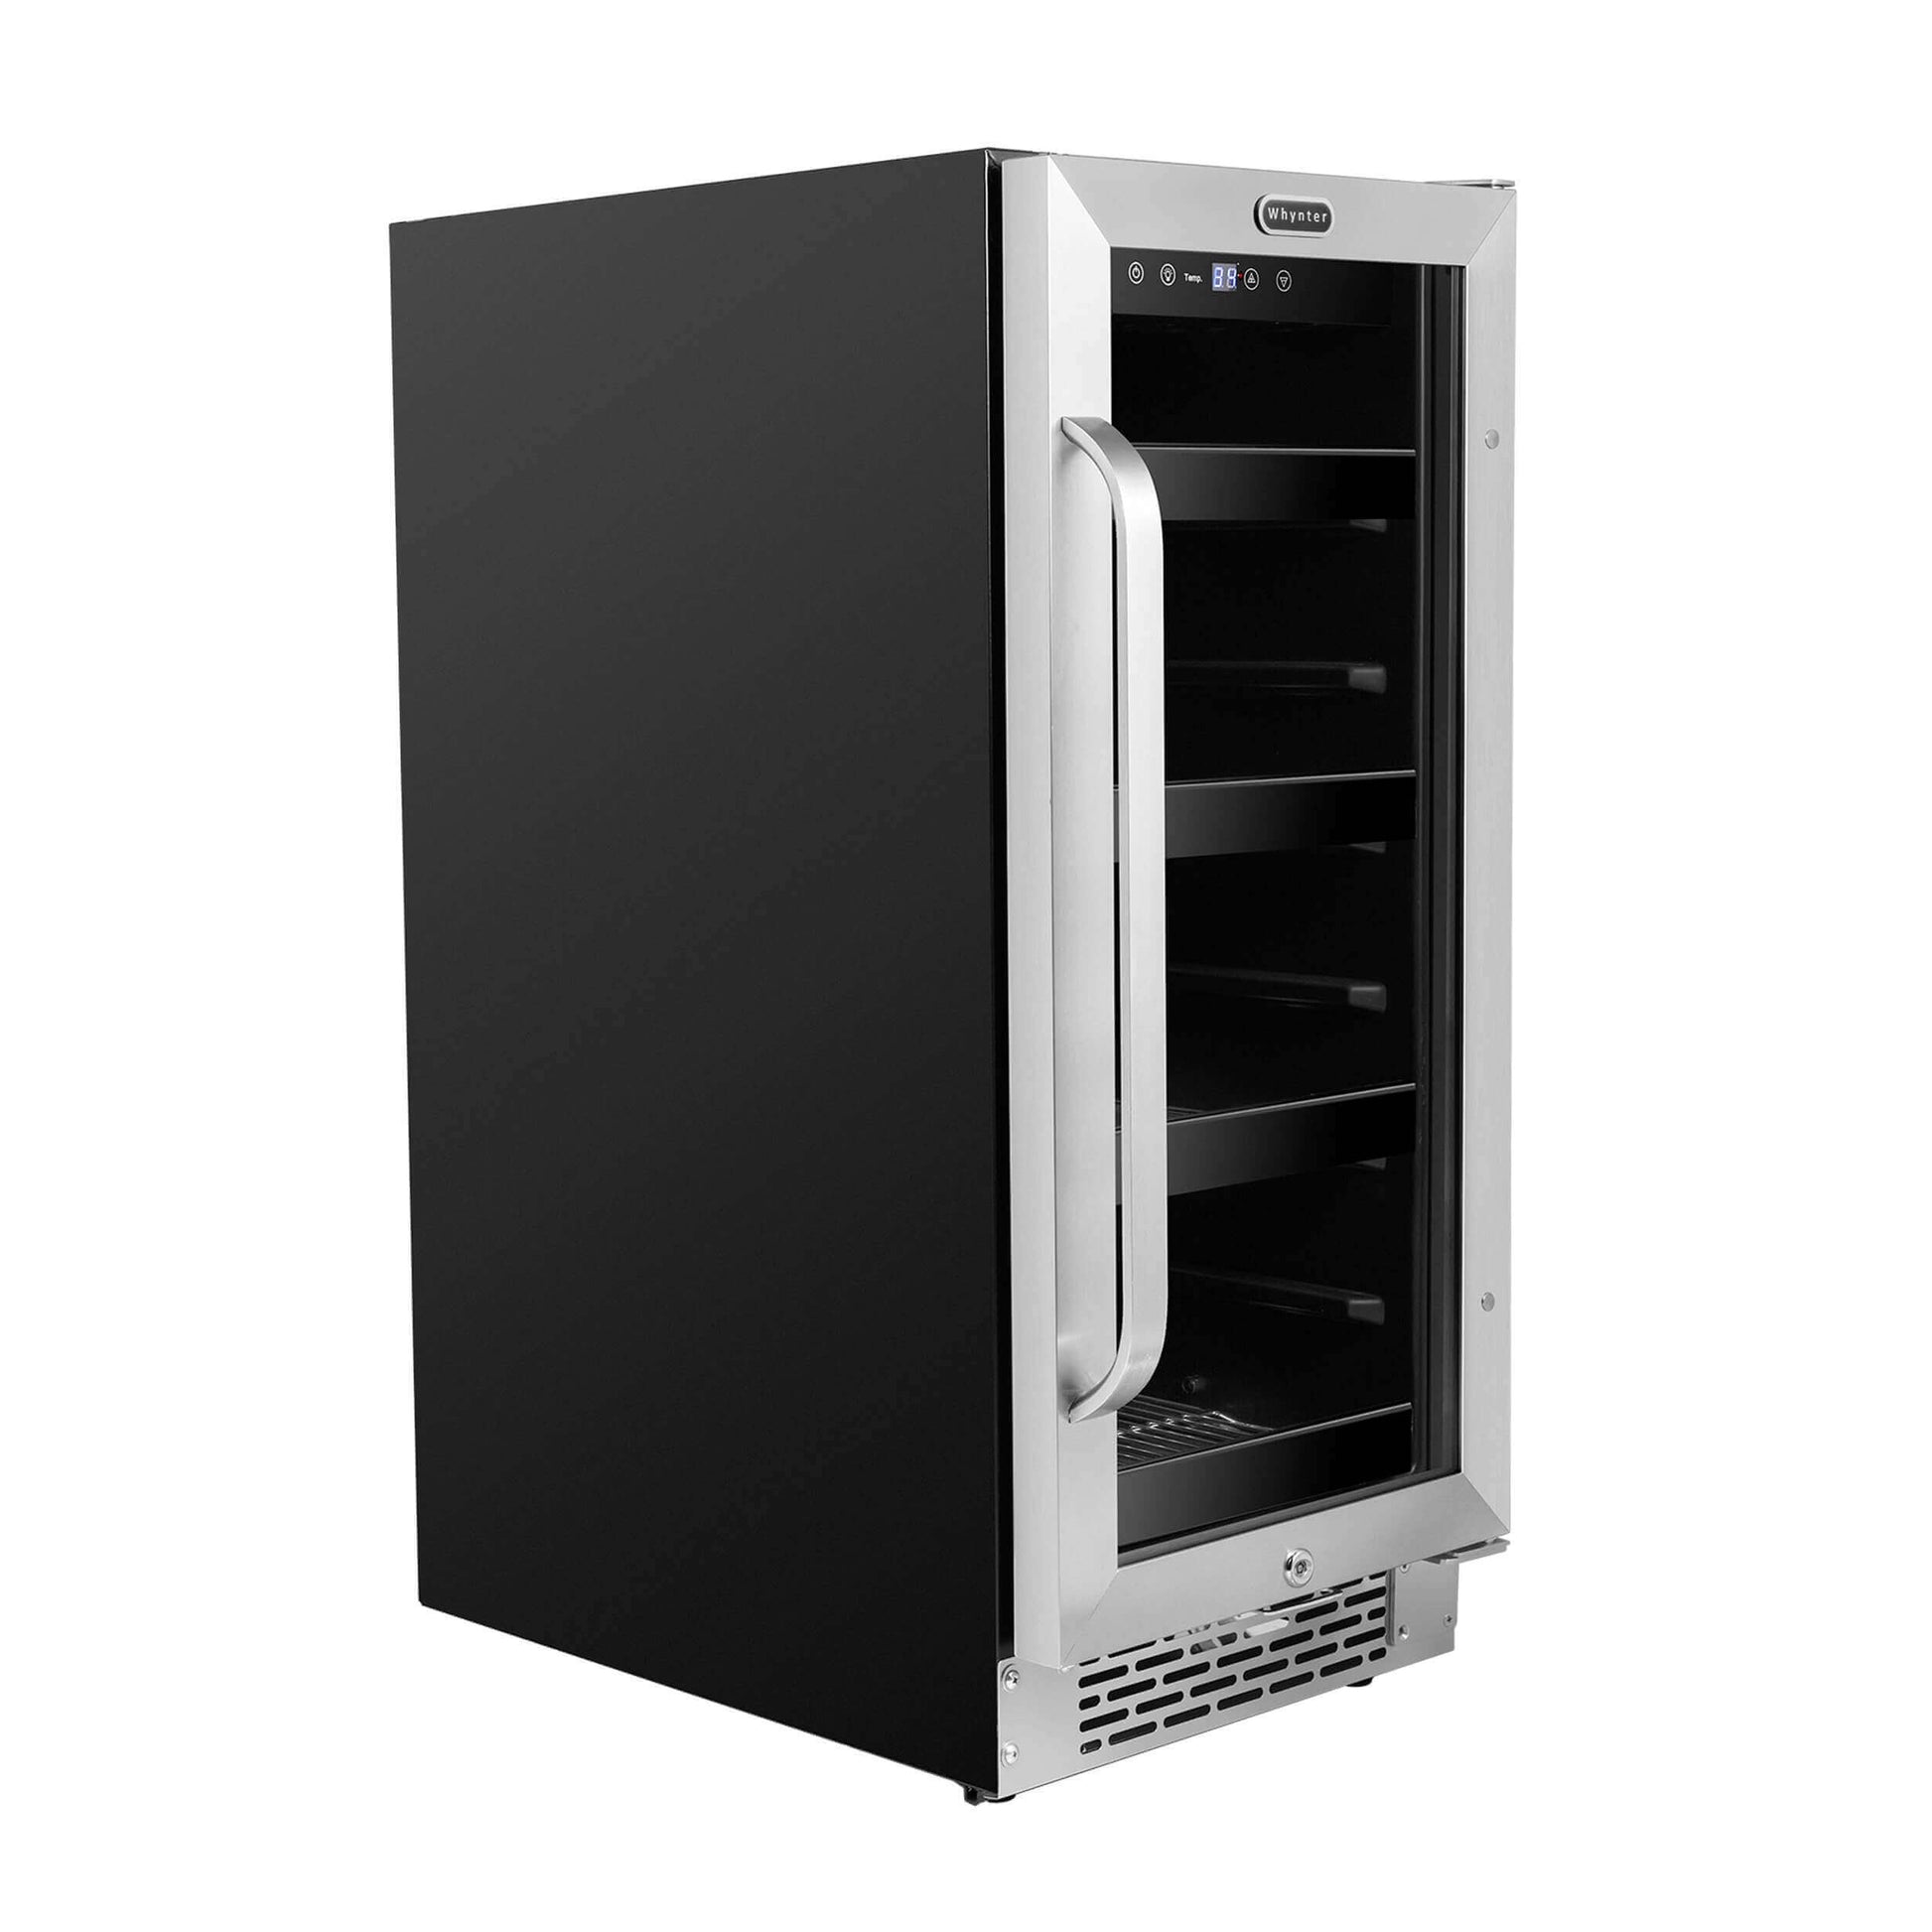 Whynter Beverage Fridge Whynter BBR-838SB 15 inch Built-In 80 Can Undercounter Stainless Steel Beverage Refrigerator with Reversible Door, Digital Control, Lock and Carbon Filter